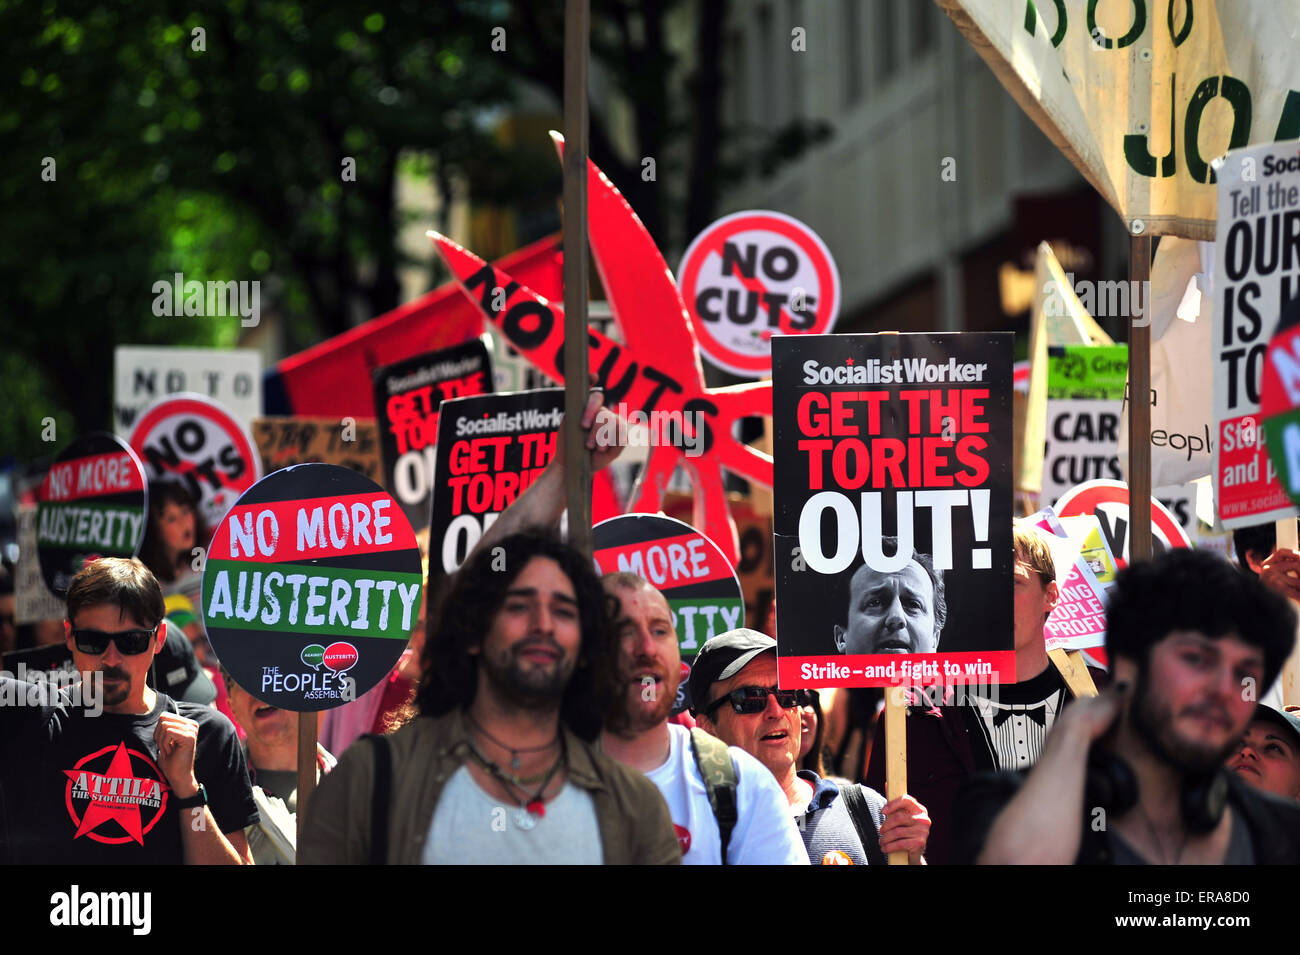 Bristol, UK. 30th June 2015 Hundreds protest in Bristol against austerity after the newly elected Conservative government announced plans for further welfare cuts in the recent Queen’s speech. Earlier in May over a thousand protesters had marched through Bristol to demonstrate against the Conservative government’s planned £12billion of welfare cuts. Credit:  Jonny White/Alamy Live News Stock Photo